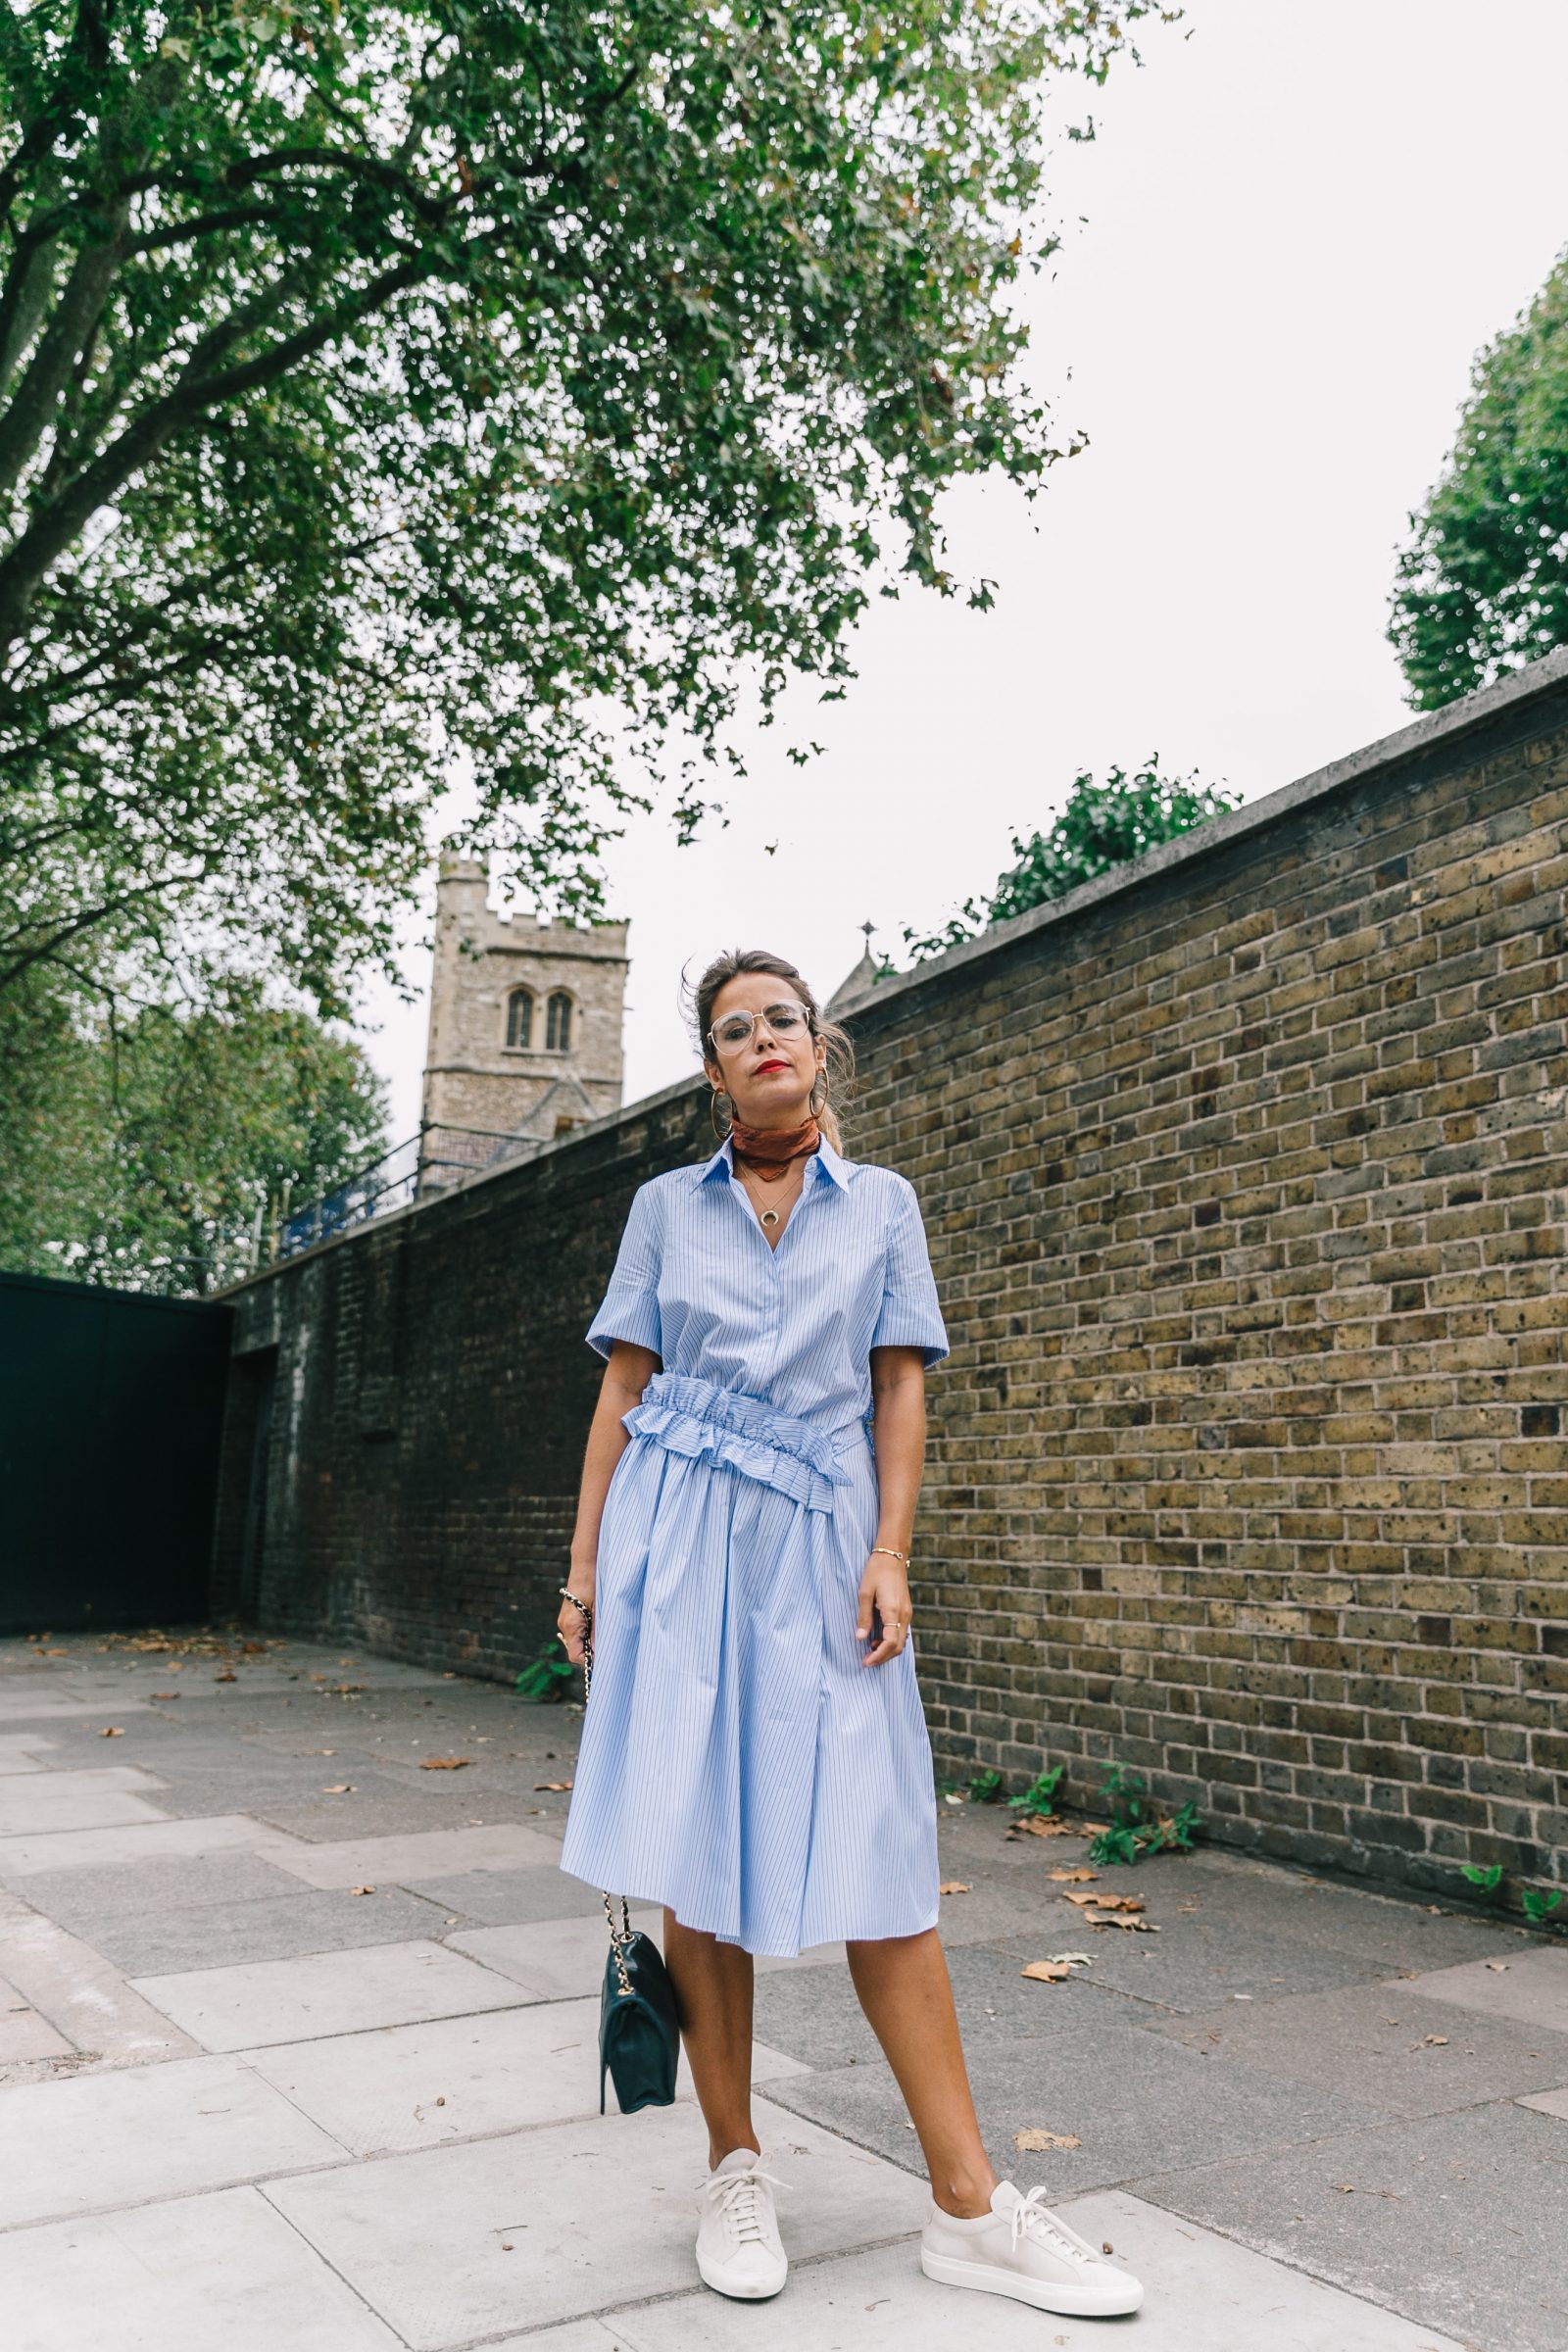 lfw-london_fashion_week_ss17-street_style-outfits-collage_vintage-vintage-stripped_dress-victoria_beckham-avenue_32